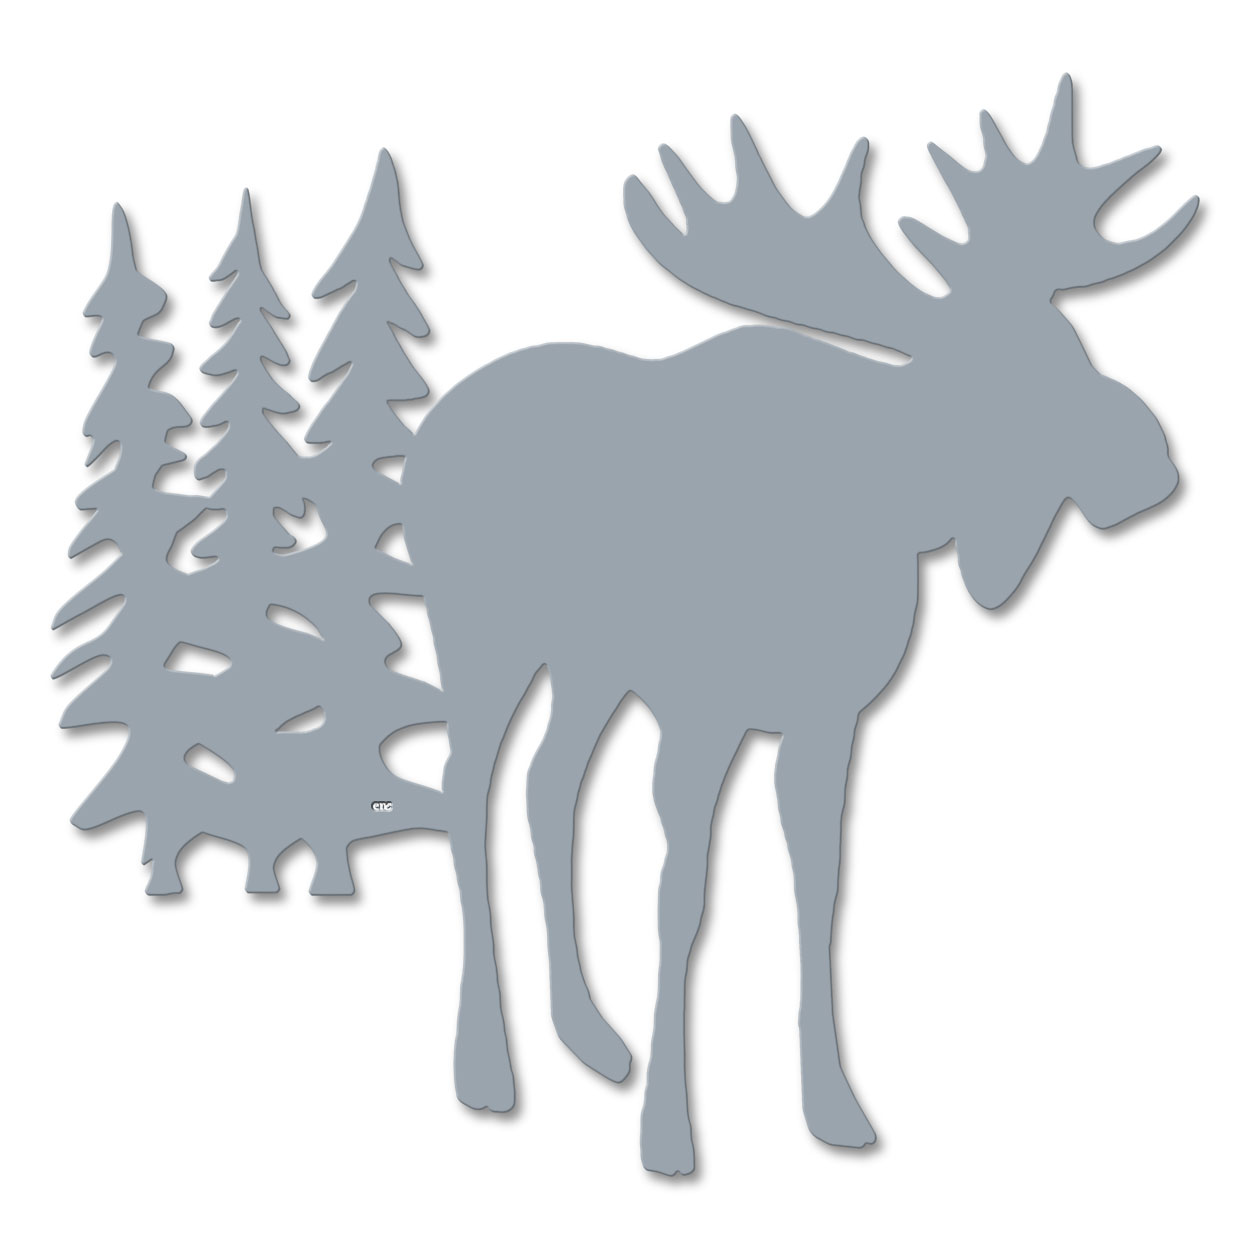 625035 - 18 or 24in Metal Wall Art - Moose And Trees - Choose Color